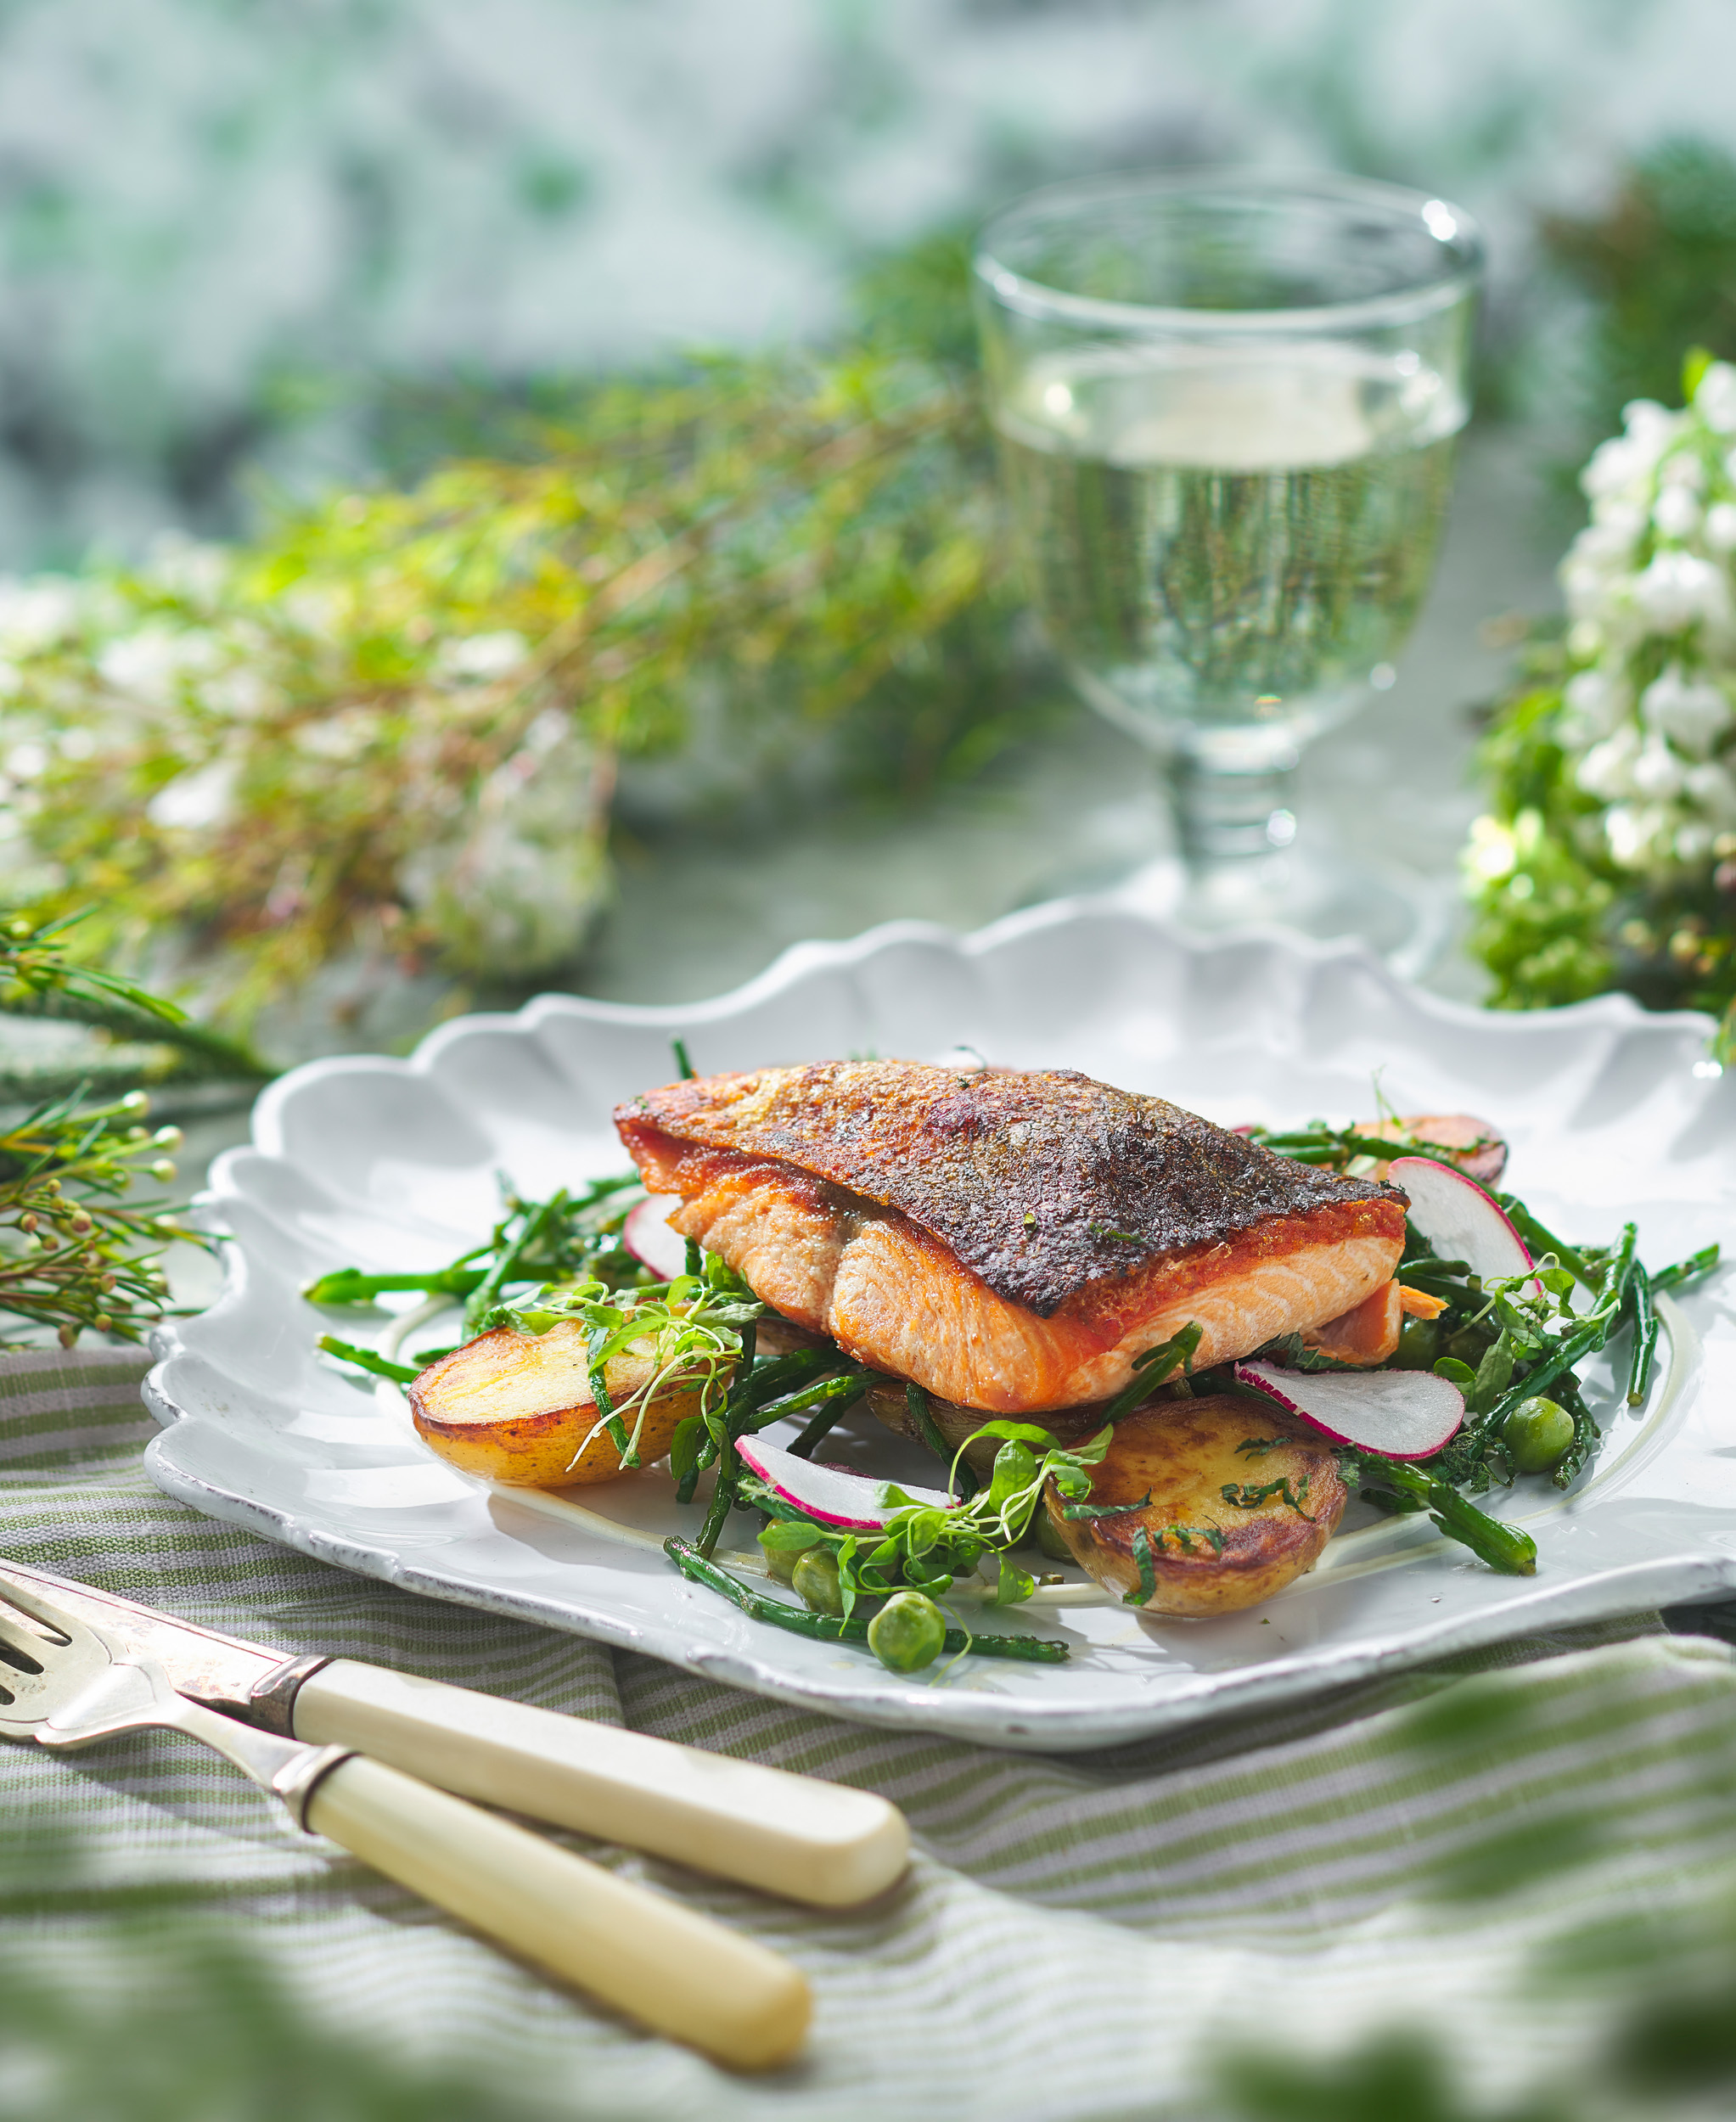 https://www.drakeandmorgan.co.uk/the-refinery-regents-place/wp-content/uploads/sites/67/2022/06/Seafood-Trout-3.jpg